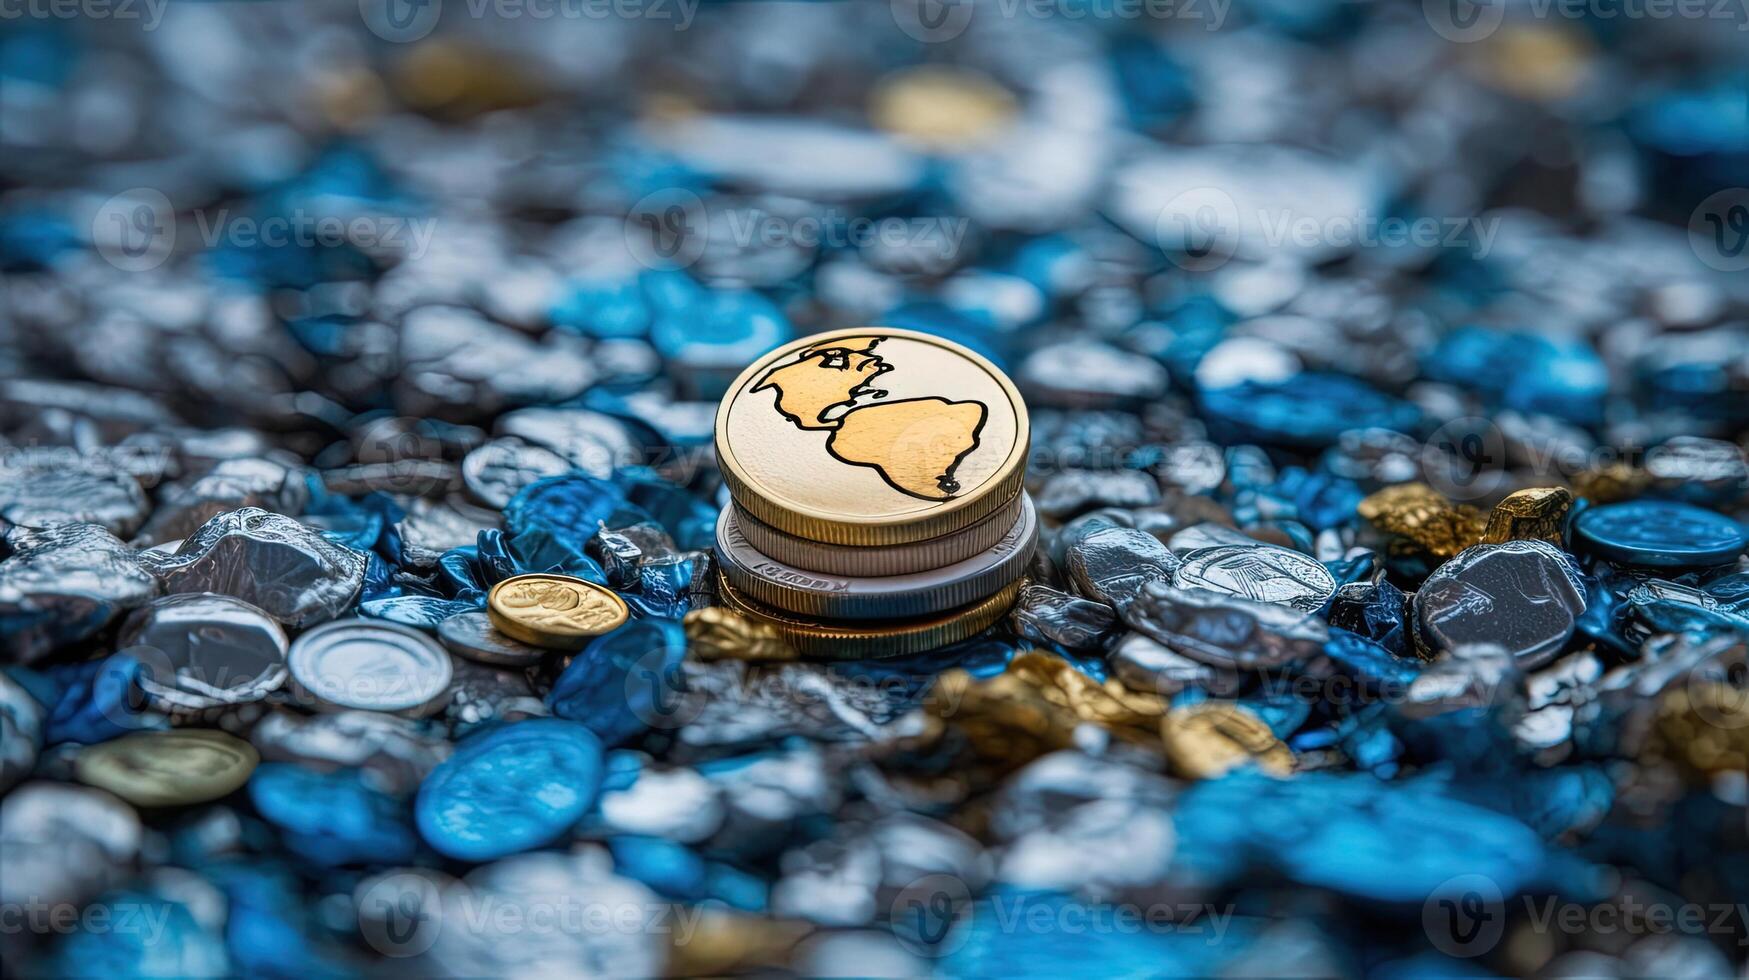 World Continents Mixed Coins on Ancient Plate Heap In Blue and Golden Color. Digital Illustration Closeup Image. photo